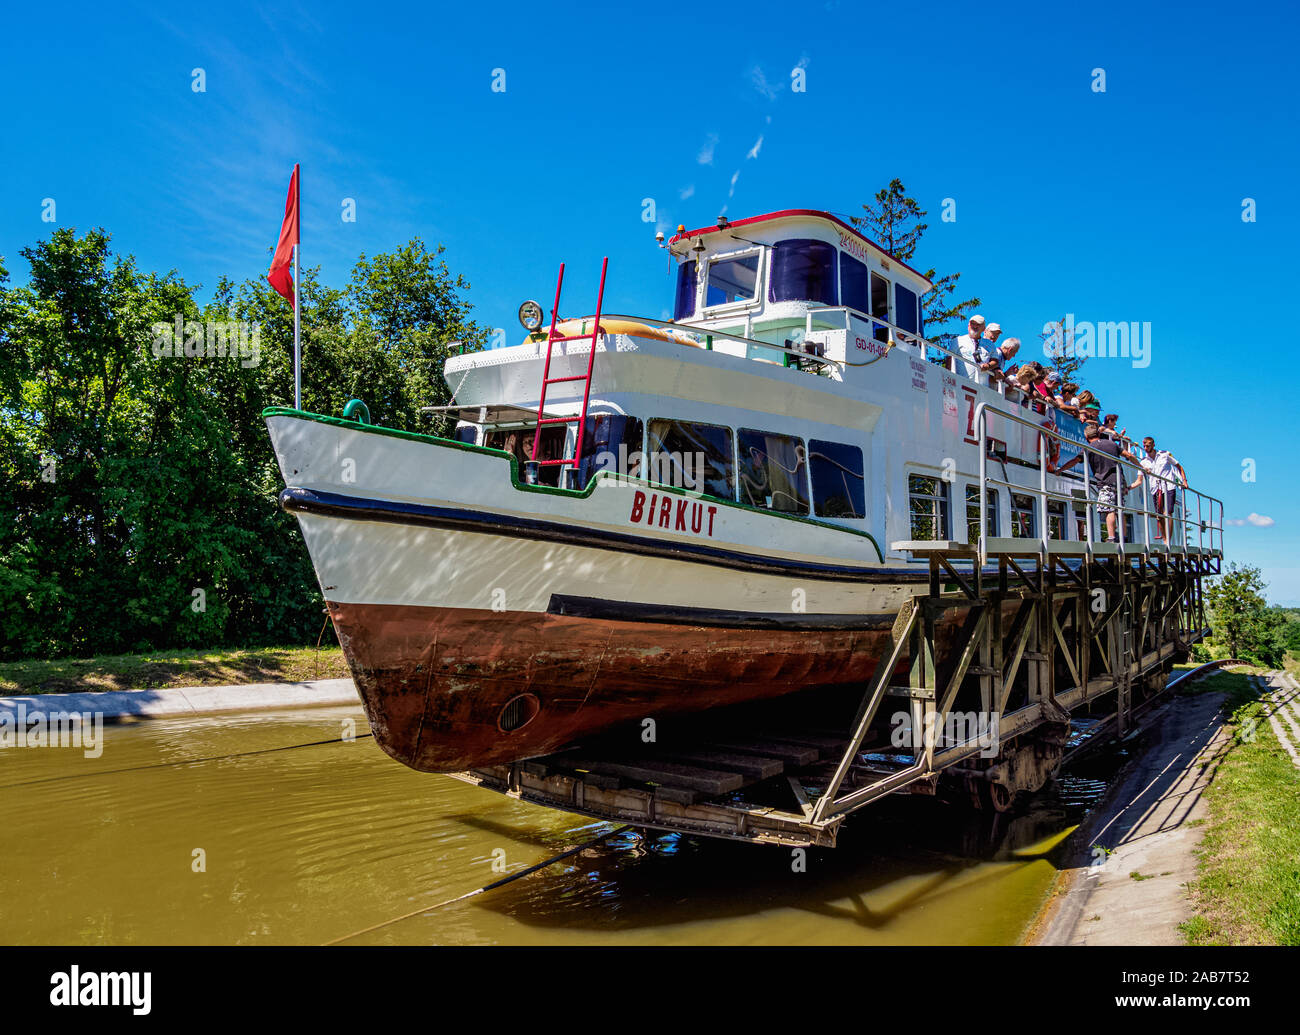 Tourist Boat in Cradle at Inclined Plane in Jelenie, Elblag Canal, Warmian-Masurian Voivodeship, Poland, Europe Stock Photo